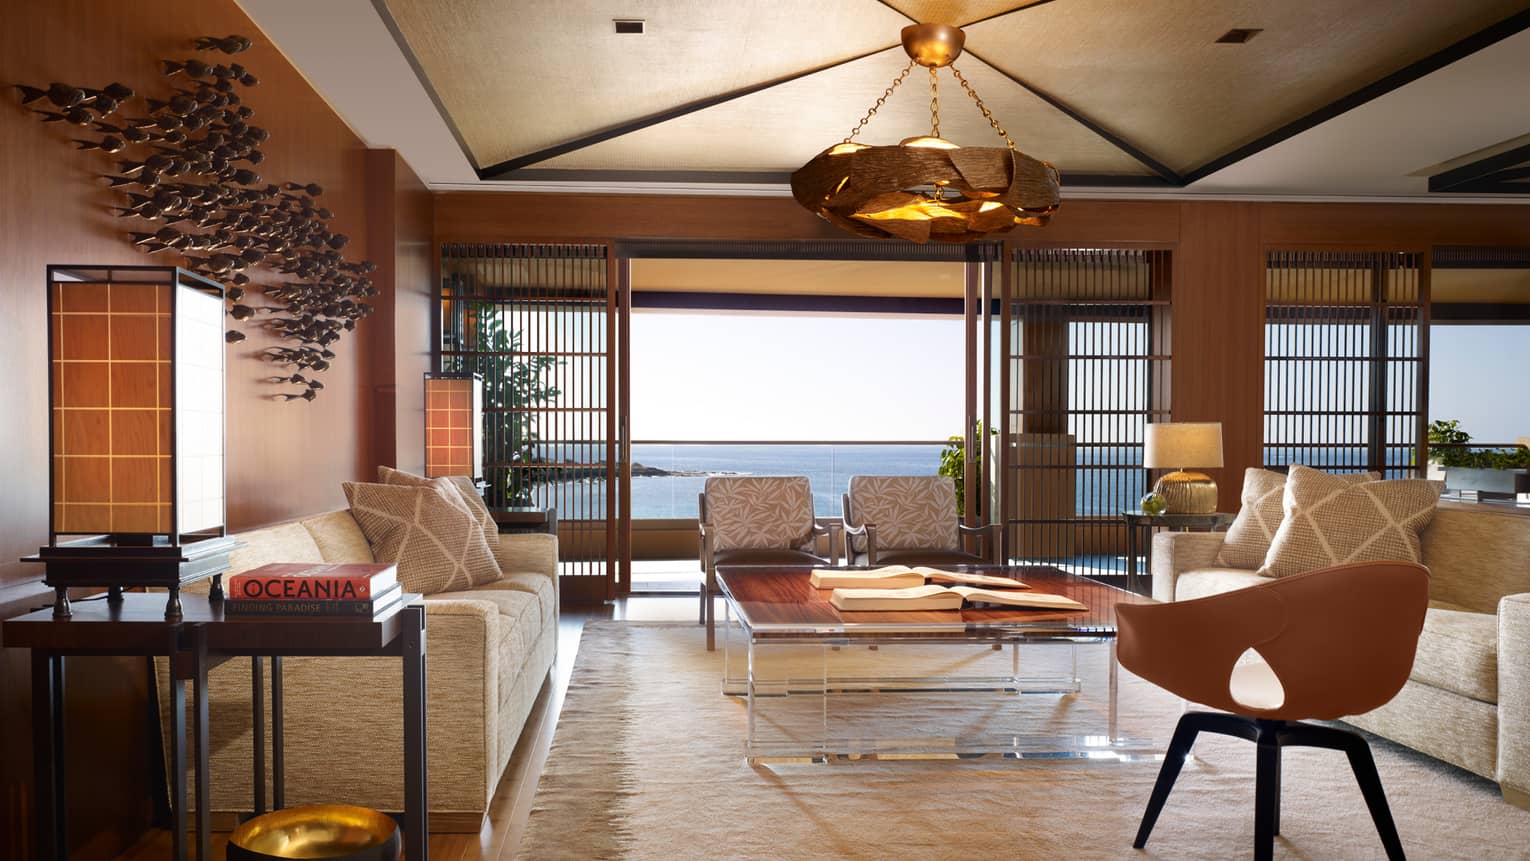 Alii Royal Suite spacious seating area with bespoke furnishings, mid-century style sofas, chairs, light